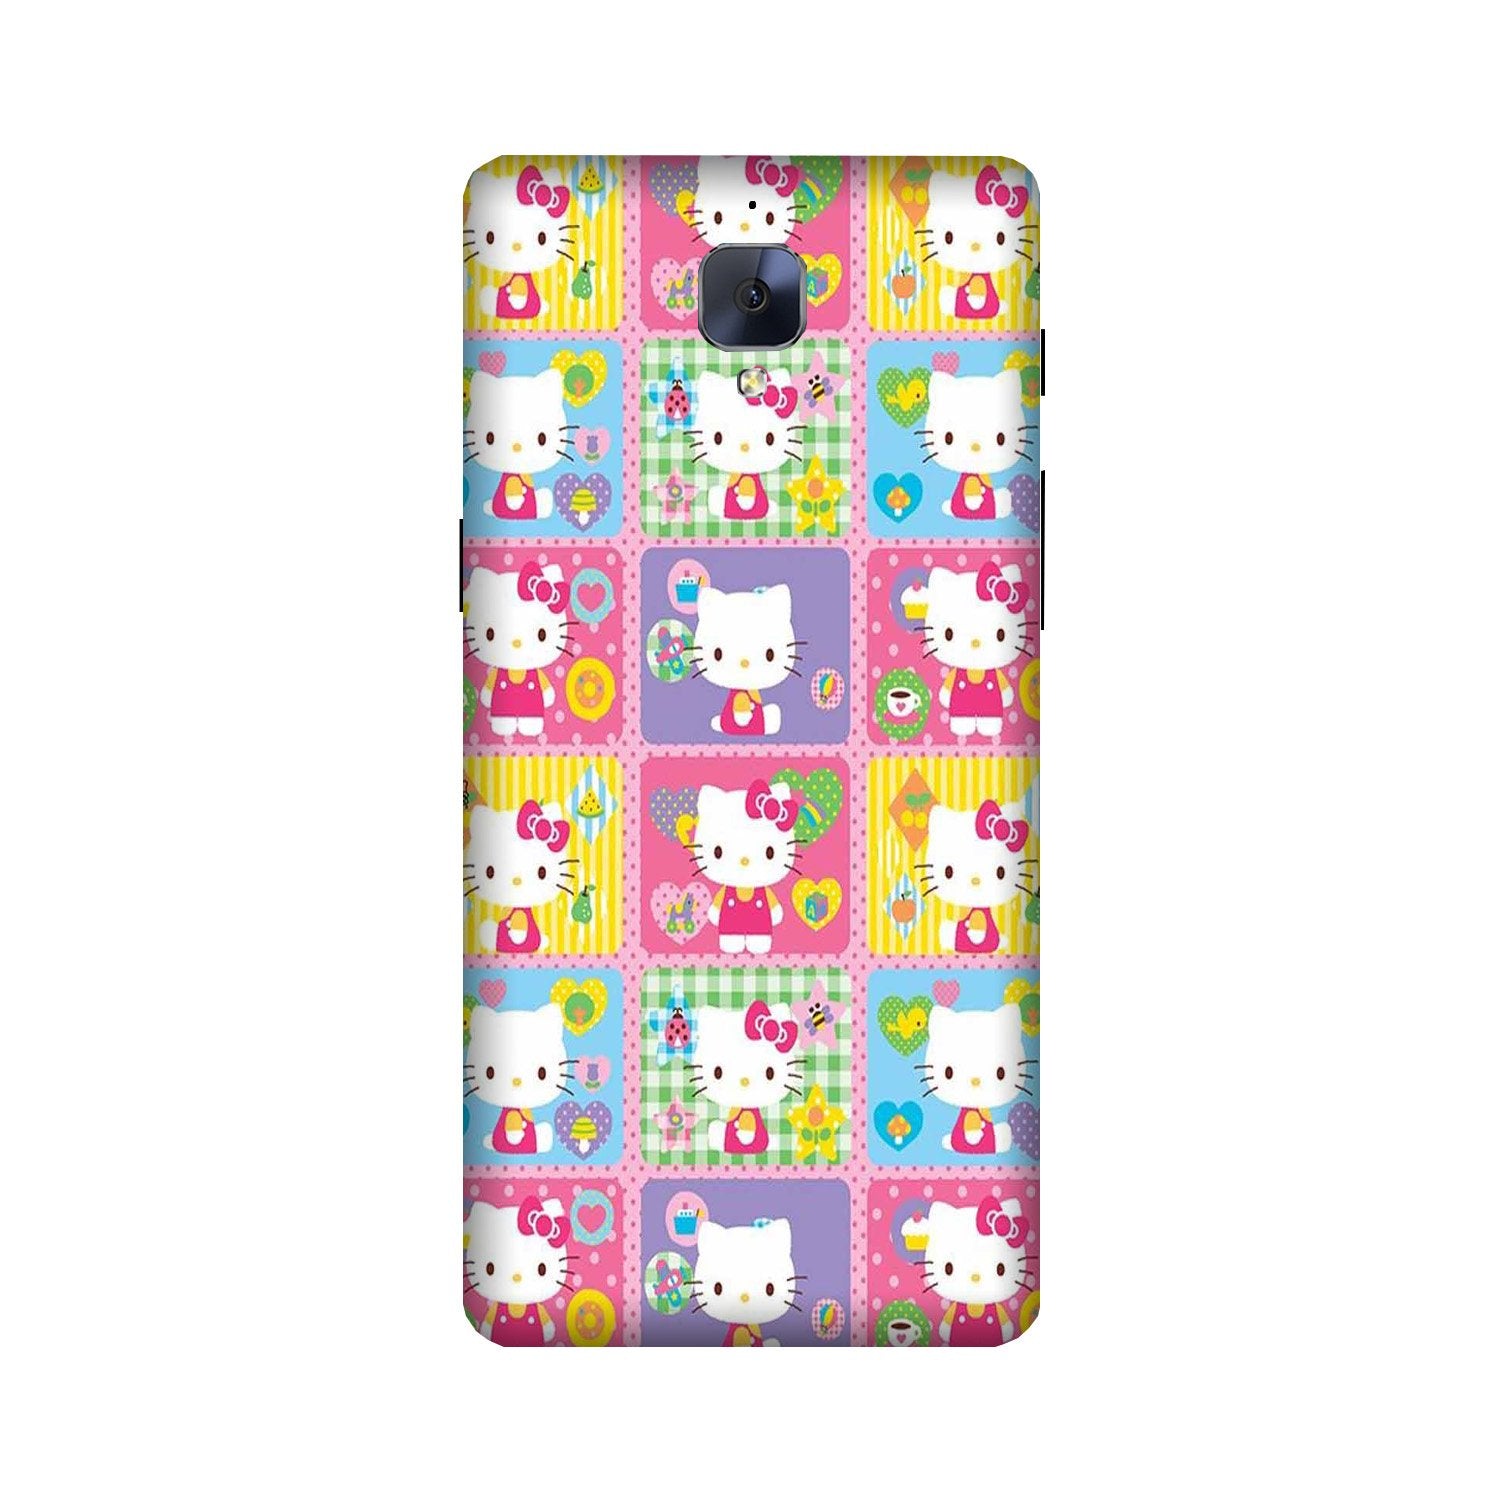 Kitty Mobile Back Case for OnePlus 3 / 3T   (Design - 400)